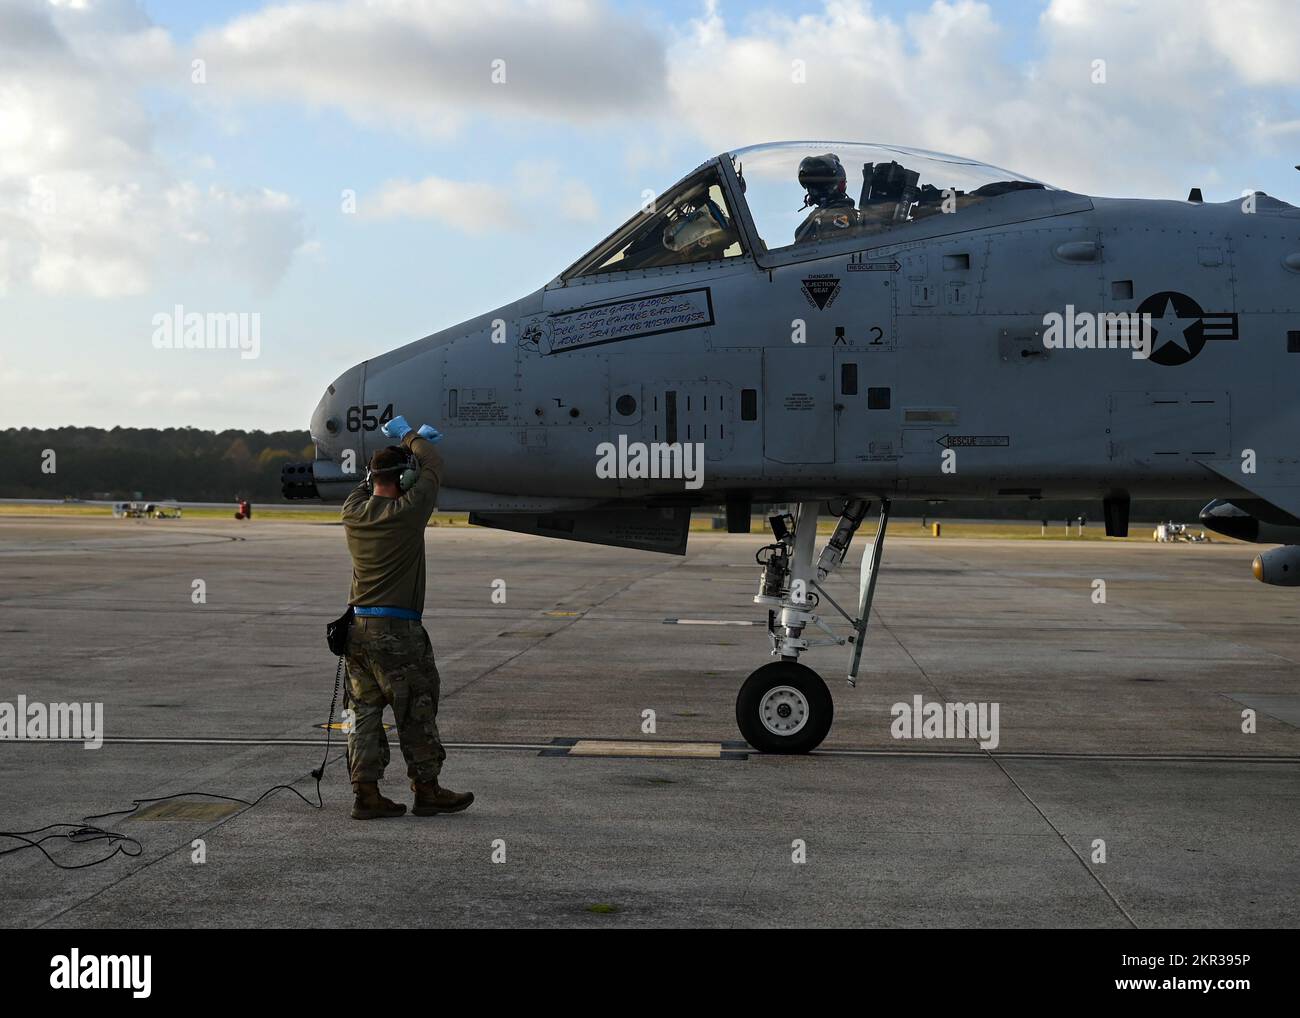 An A-10 Thunderbolt II from the 354th Fighter Squadron at Davis-Monthan Air Force Base is marshaled in at Naval Air Station Oceana, Virginia, during Bushwhacker 22-07, Nov. 3, 2022. This operational training was a part of the Lead Wing certification process and allowed DM to prepare for the final certification exercise projected to take place in 2023. (U.S. Air Force photo by Airman 1st Class Paige Weldon) Stock Photo